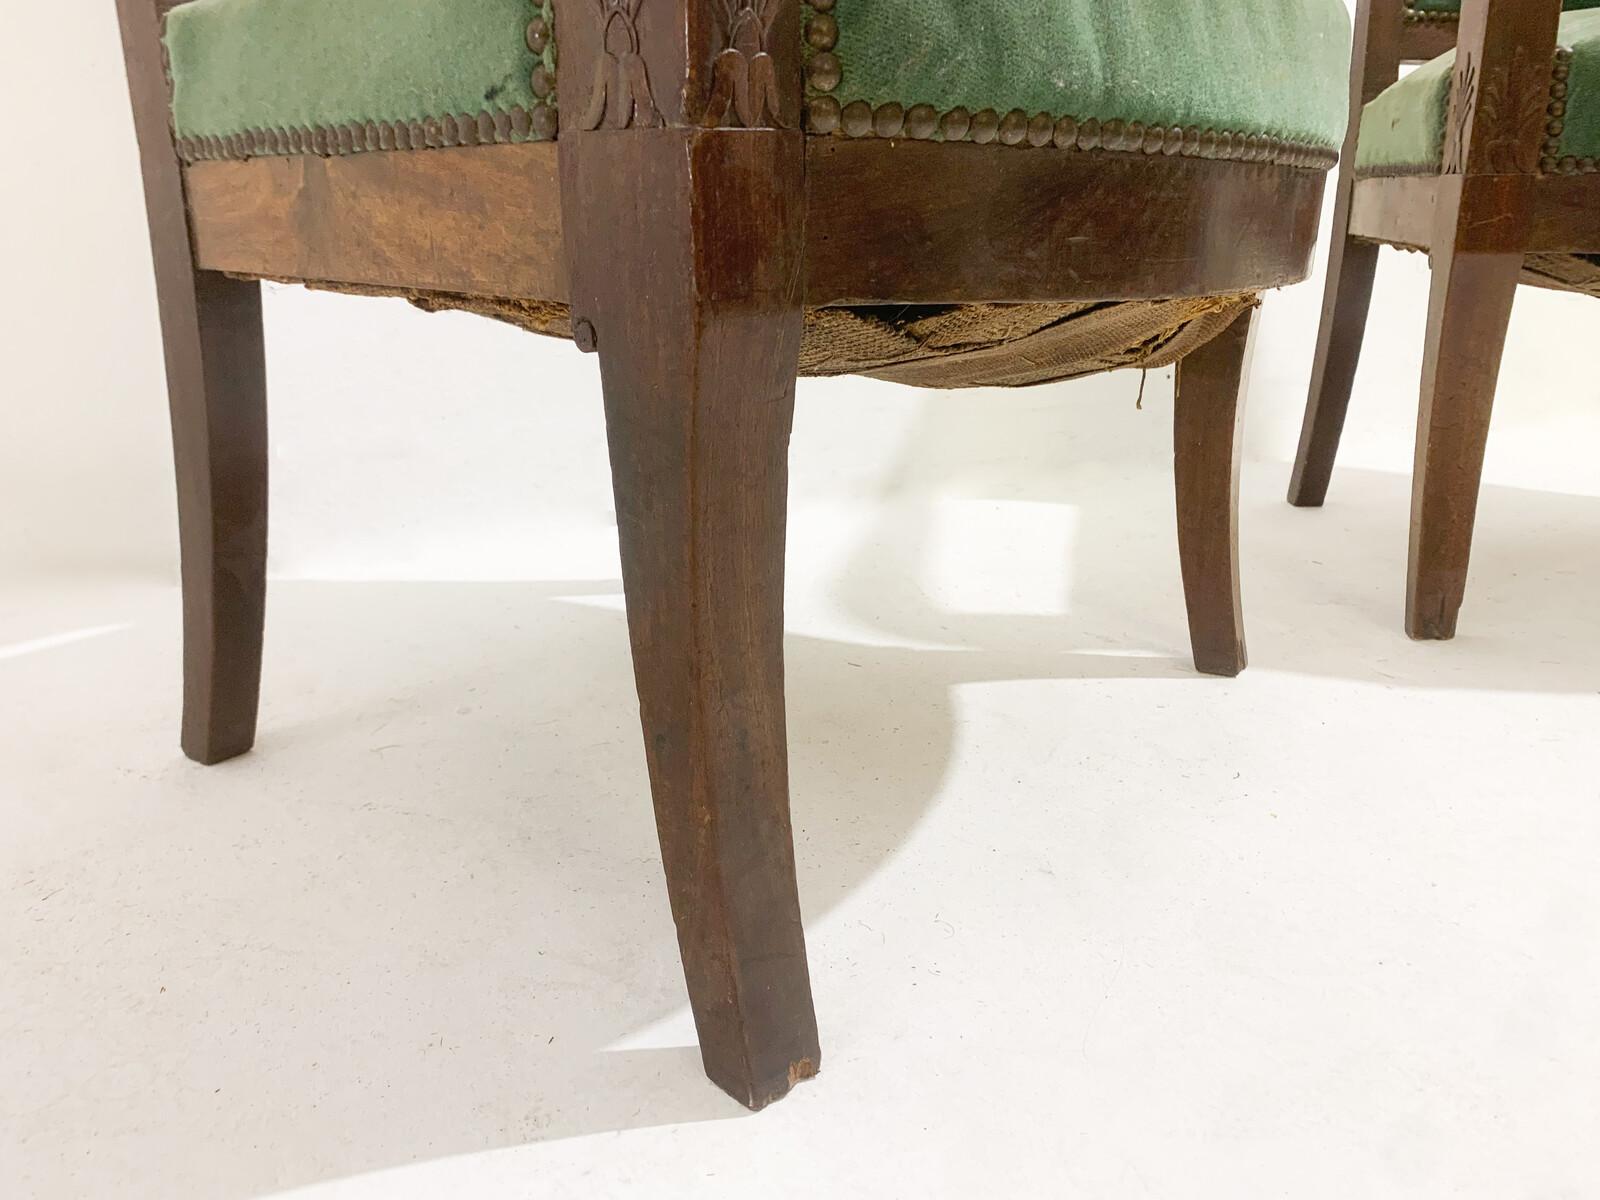 Pair of Green Armchairs, Empire, Mahogany, 19th Century For Sale 4